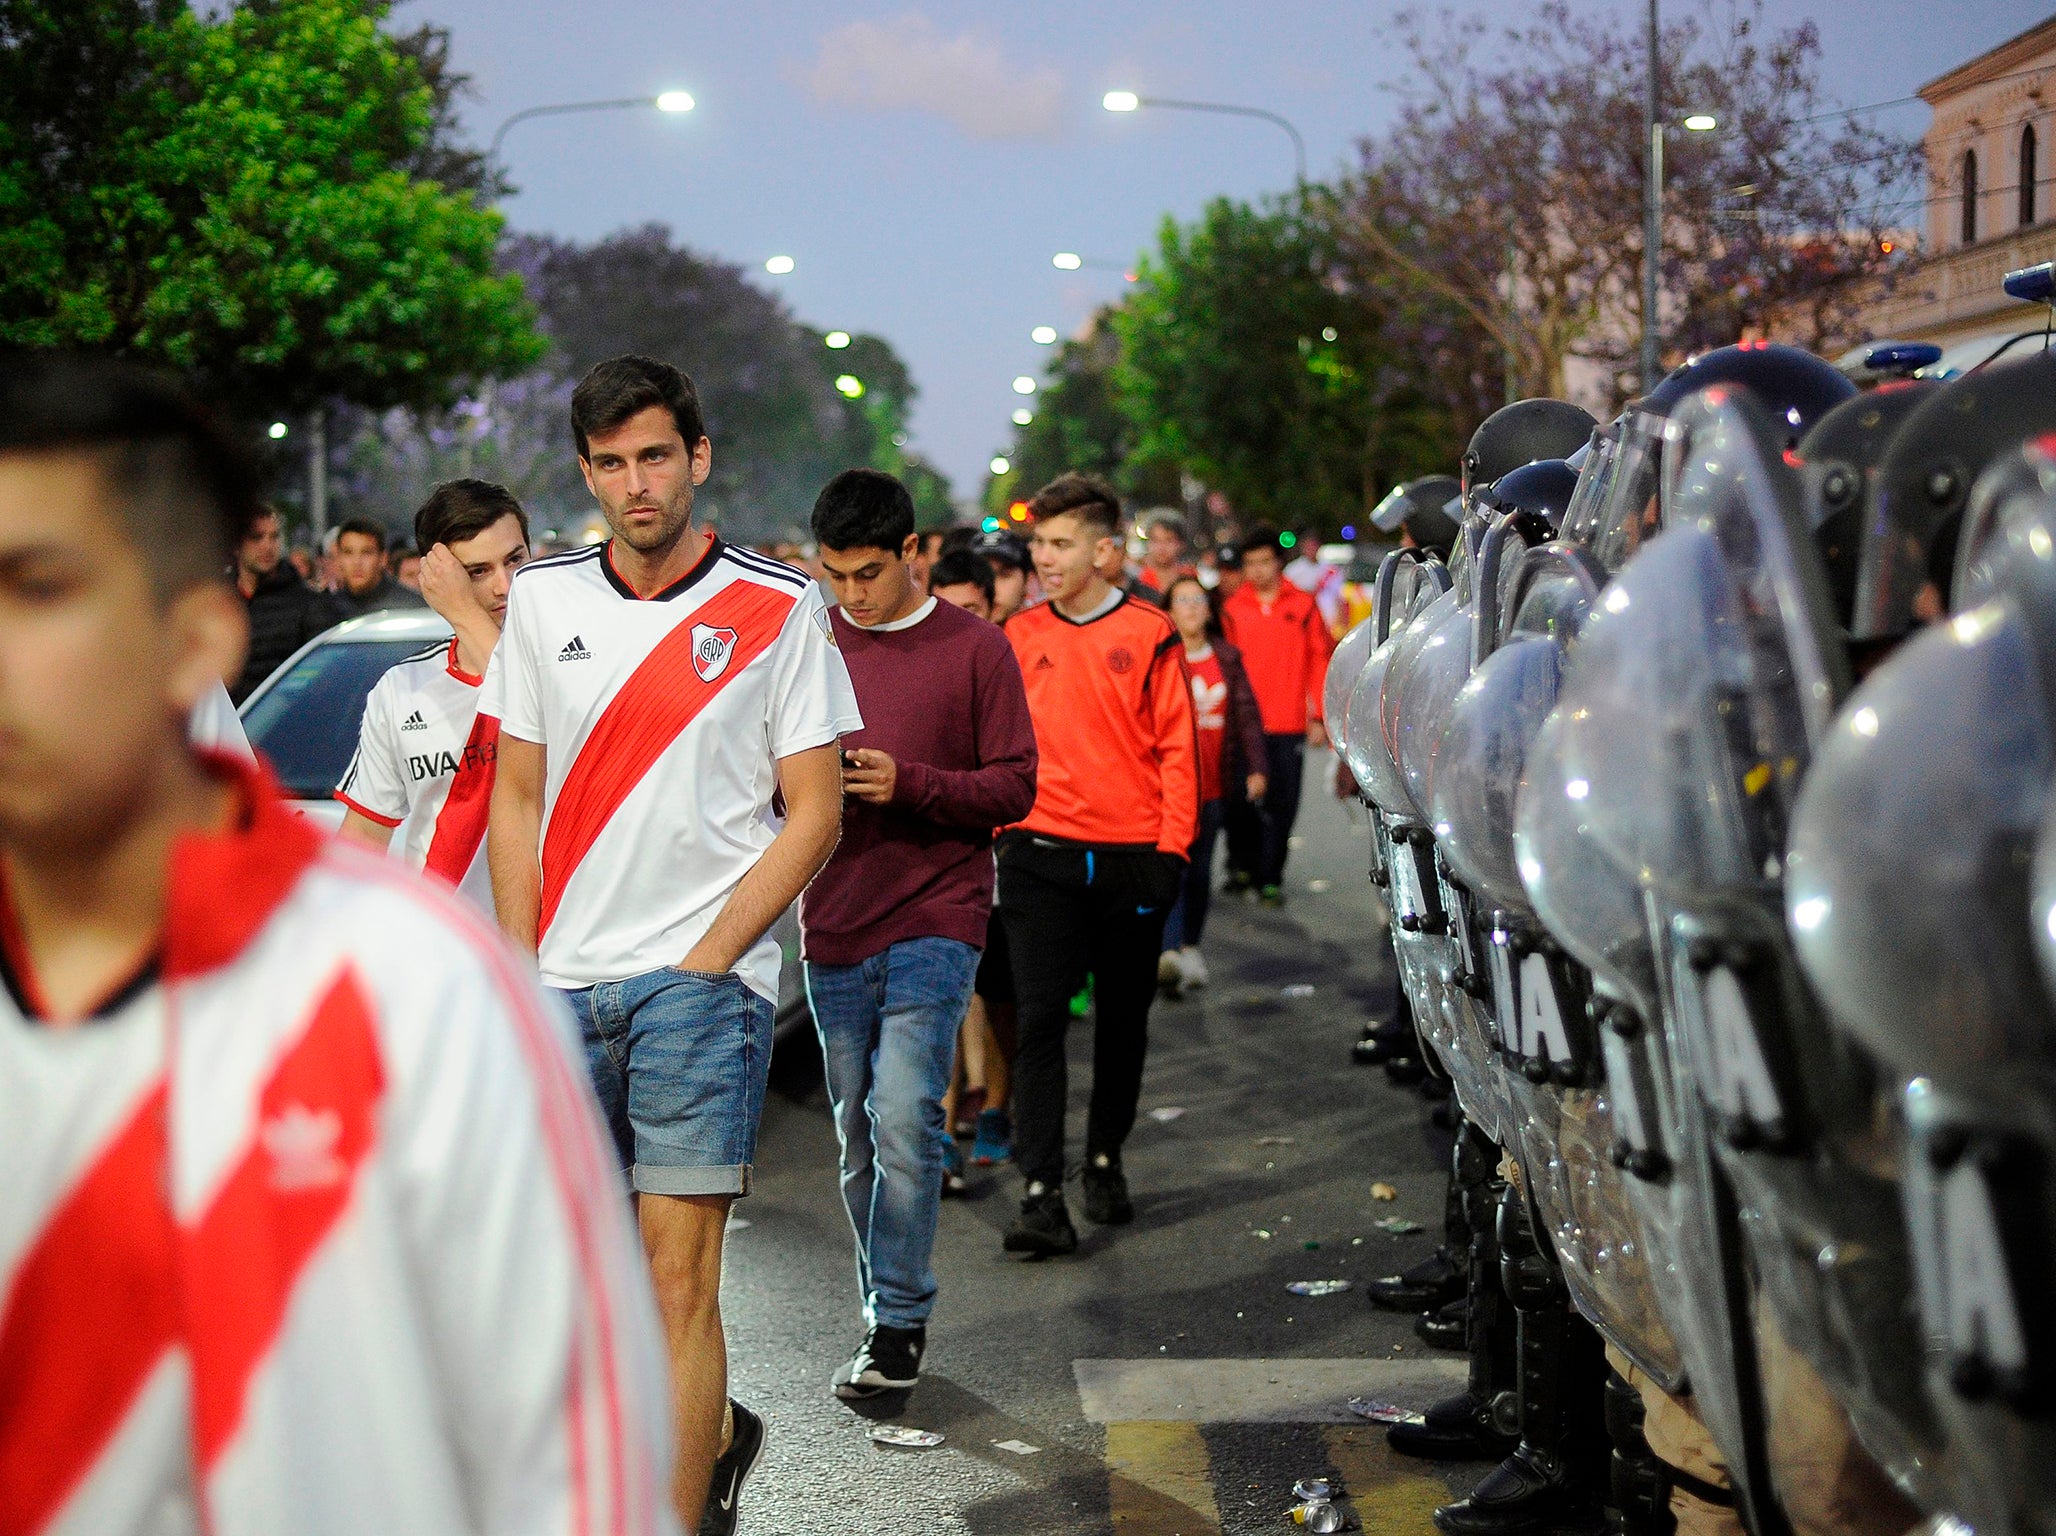 Teargas and tension: The shameful inside story of the Copa Libertadores final that never was